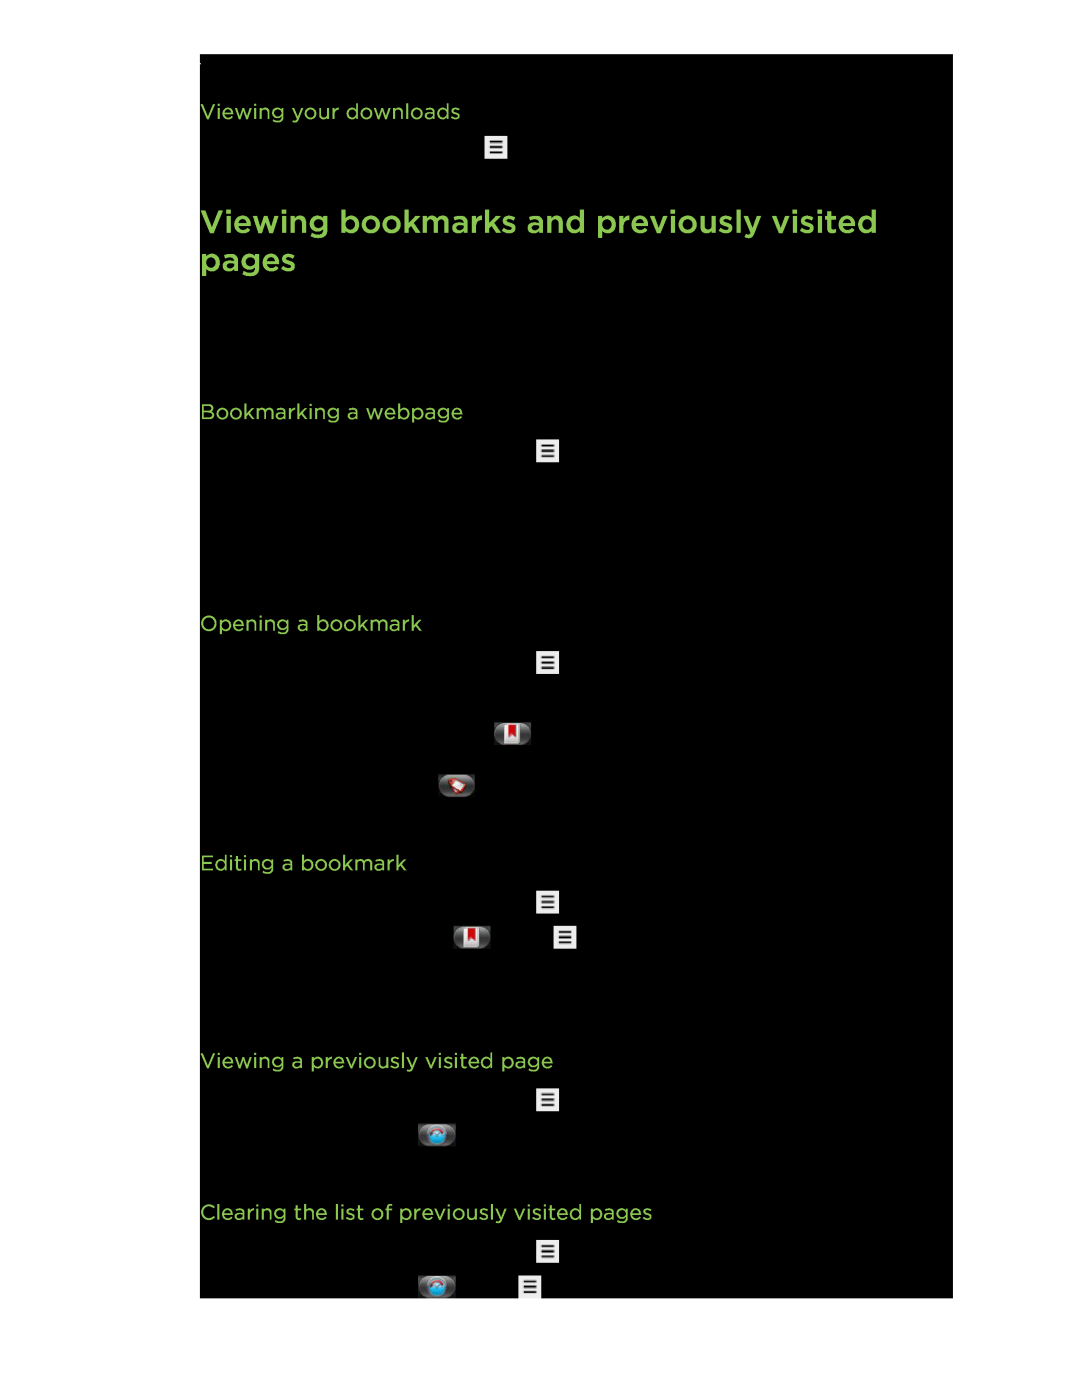 HTC S Viewing bookmarks and previously visited pages, Viewing your downloads, Bookmarking a webpage, Opening a bookmark 